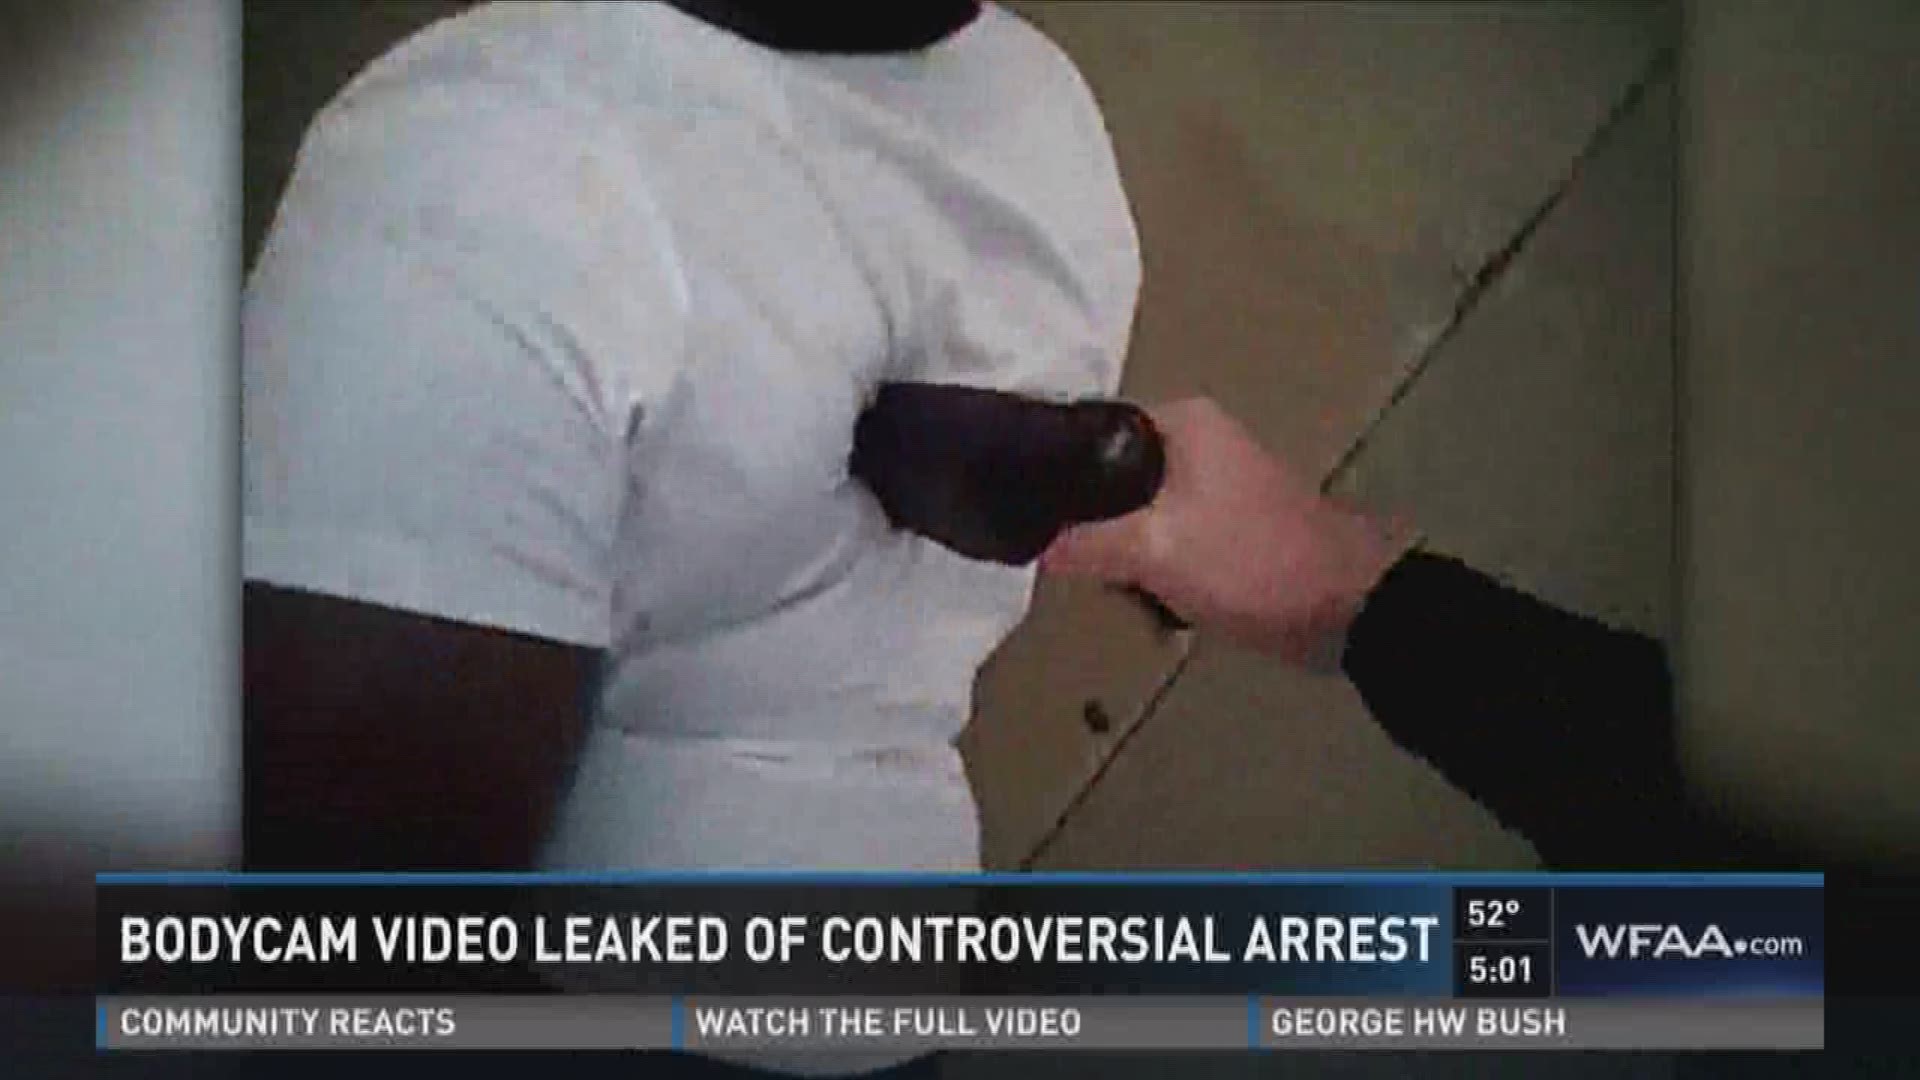 MAN CHARGED, FAMILY CLEARED AFTER VIDEO LEAKS